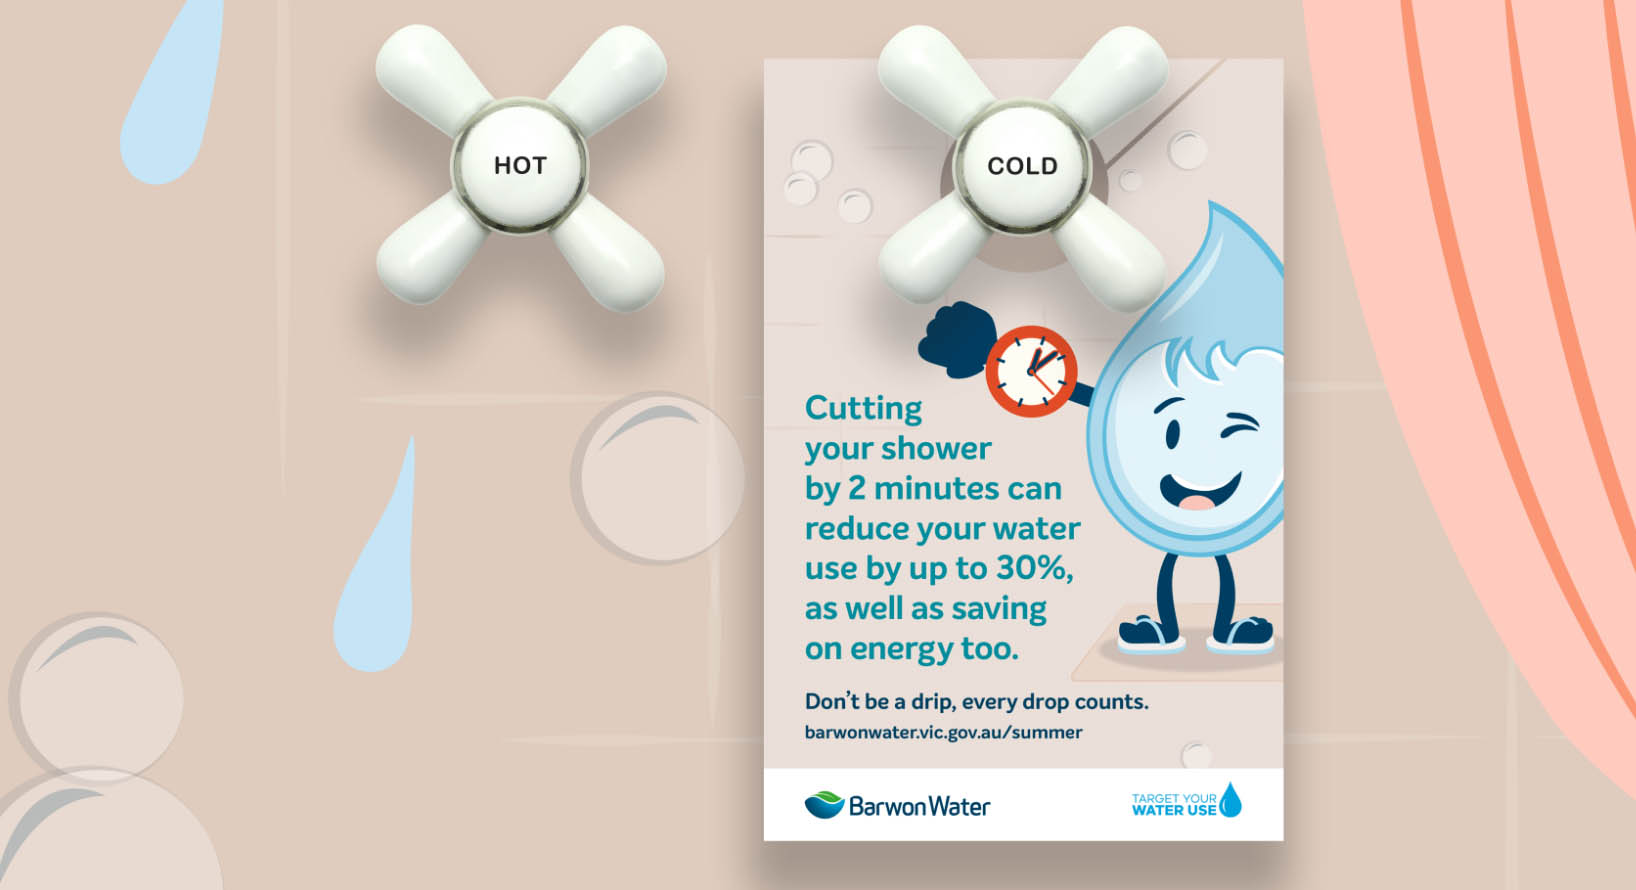 Flyer hanging from shower hot and cold tap, promoting Barwon Water's shower water saving tips.